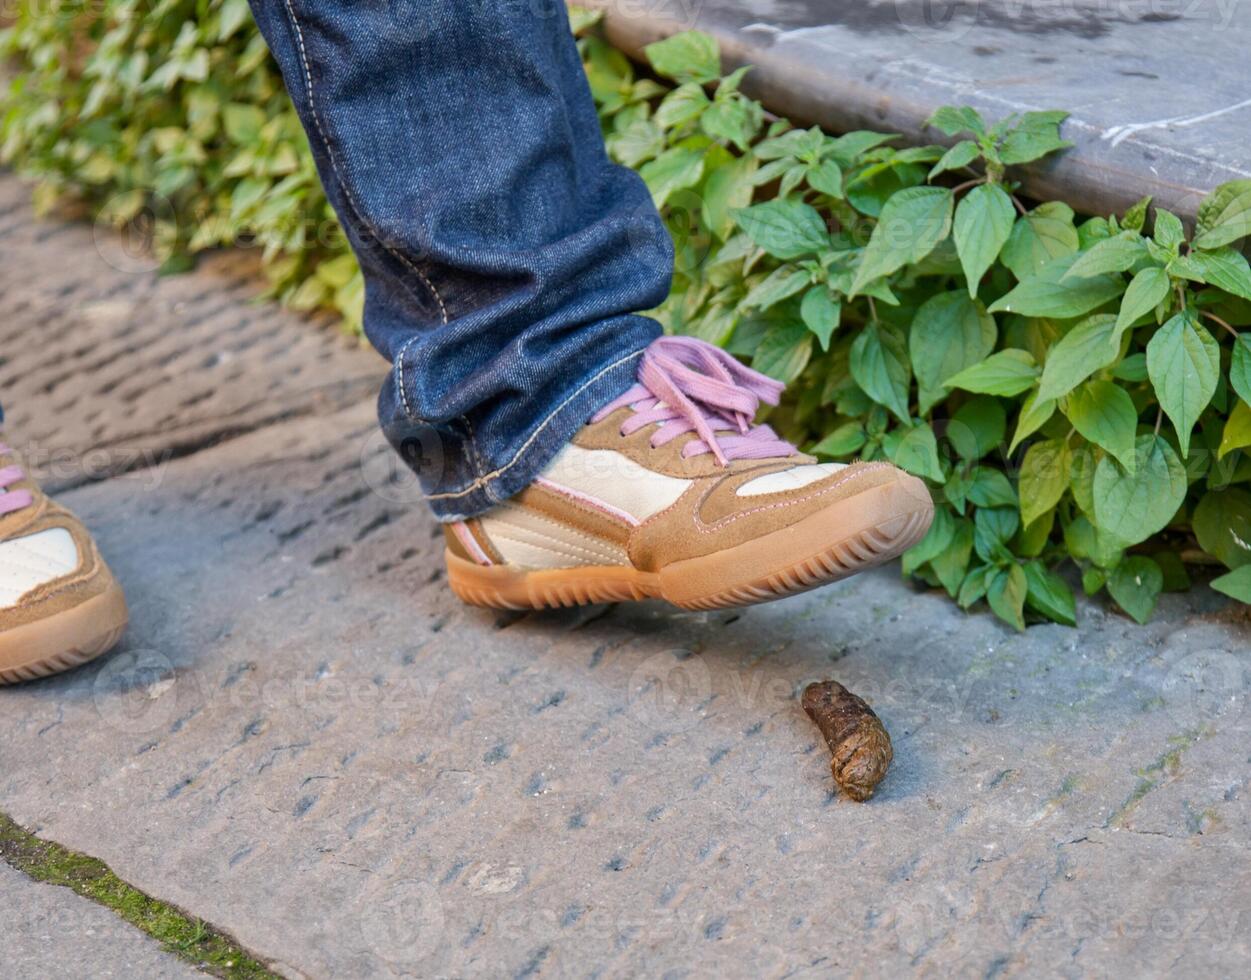 Foot of a pedestrian who is about to step on a dog poop photo